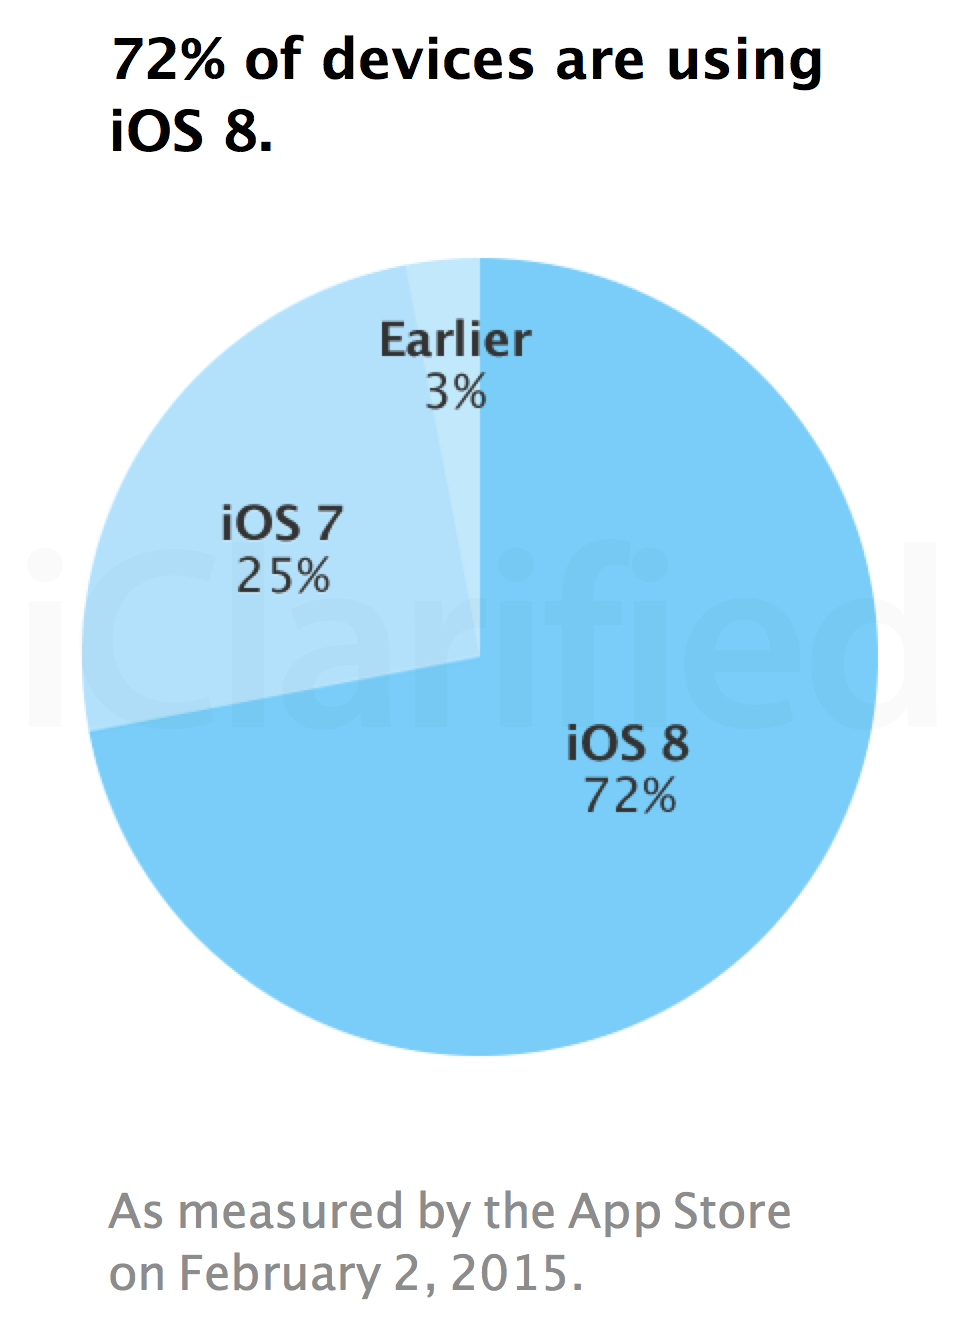 iOS 8 Adoption Increases 3% to 72% Following the Release of iOS 8.1.3 [Chart]